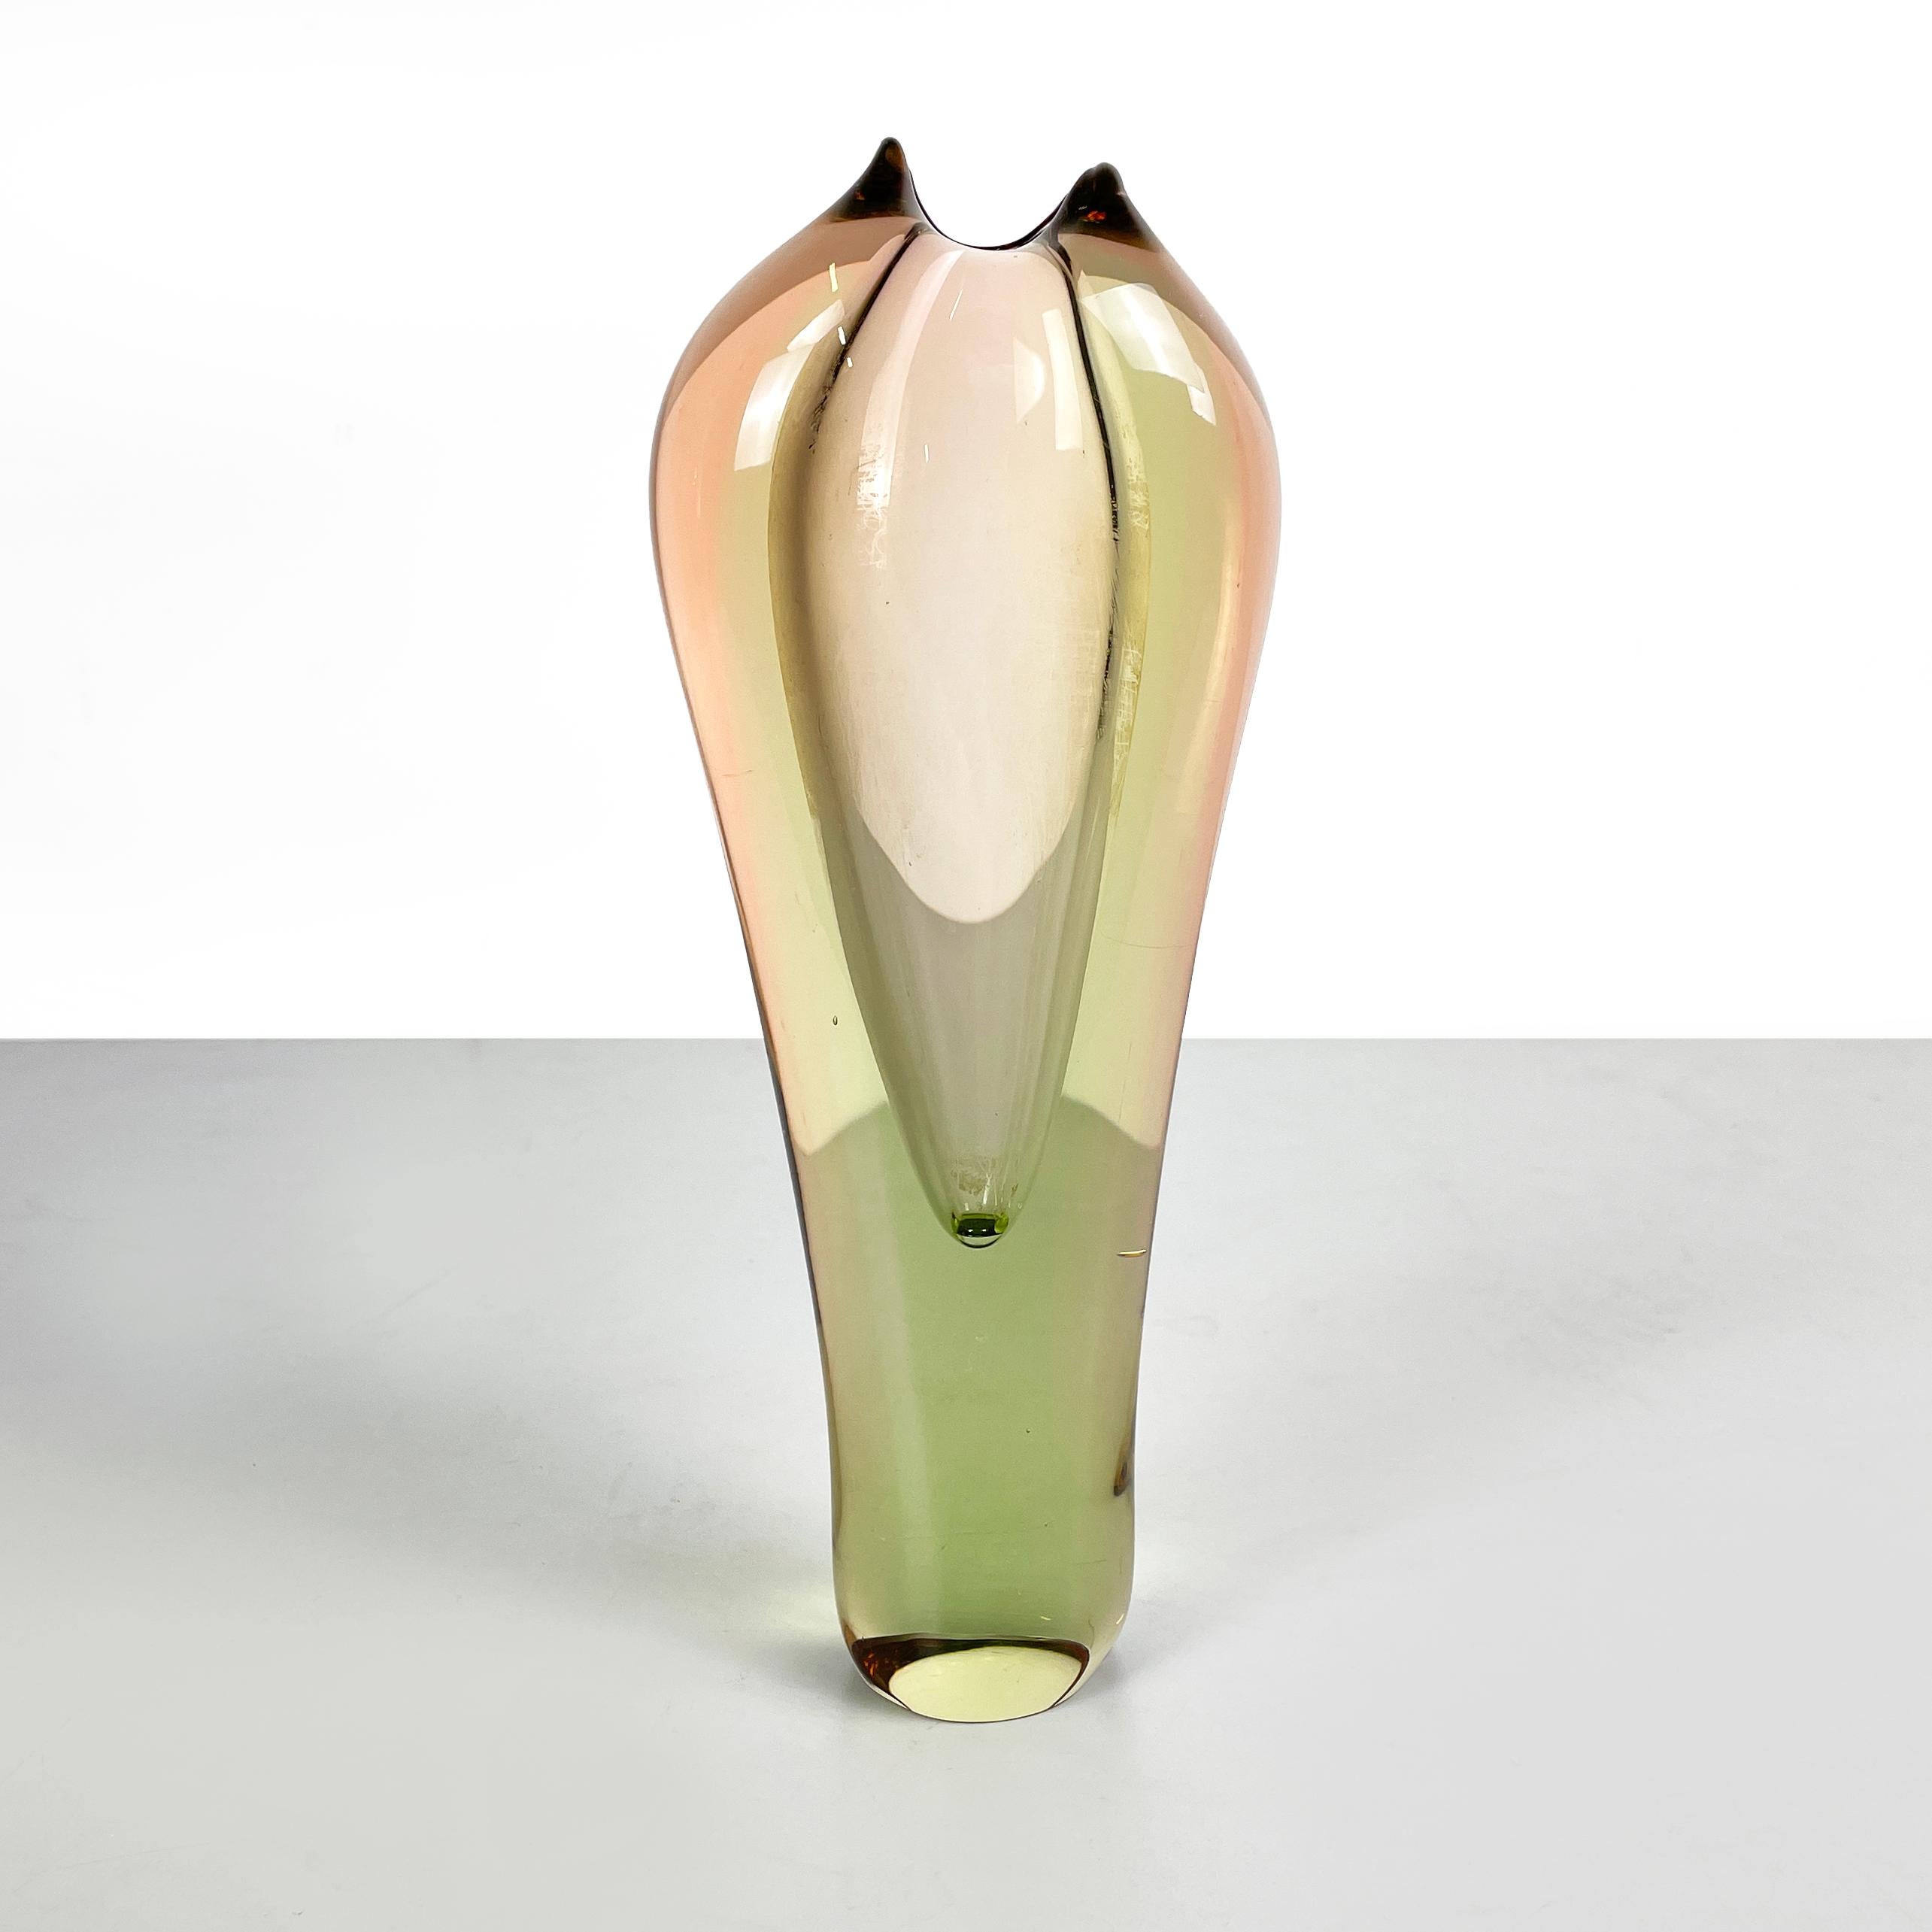 Italian modern oval pink and green Murano glass vase by i Sommersi series, 1970s
Oval-based vase entirely in thick Murano glass. The glass has different shades between pink-orange and light green tones. The shape of the vase is rounded and